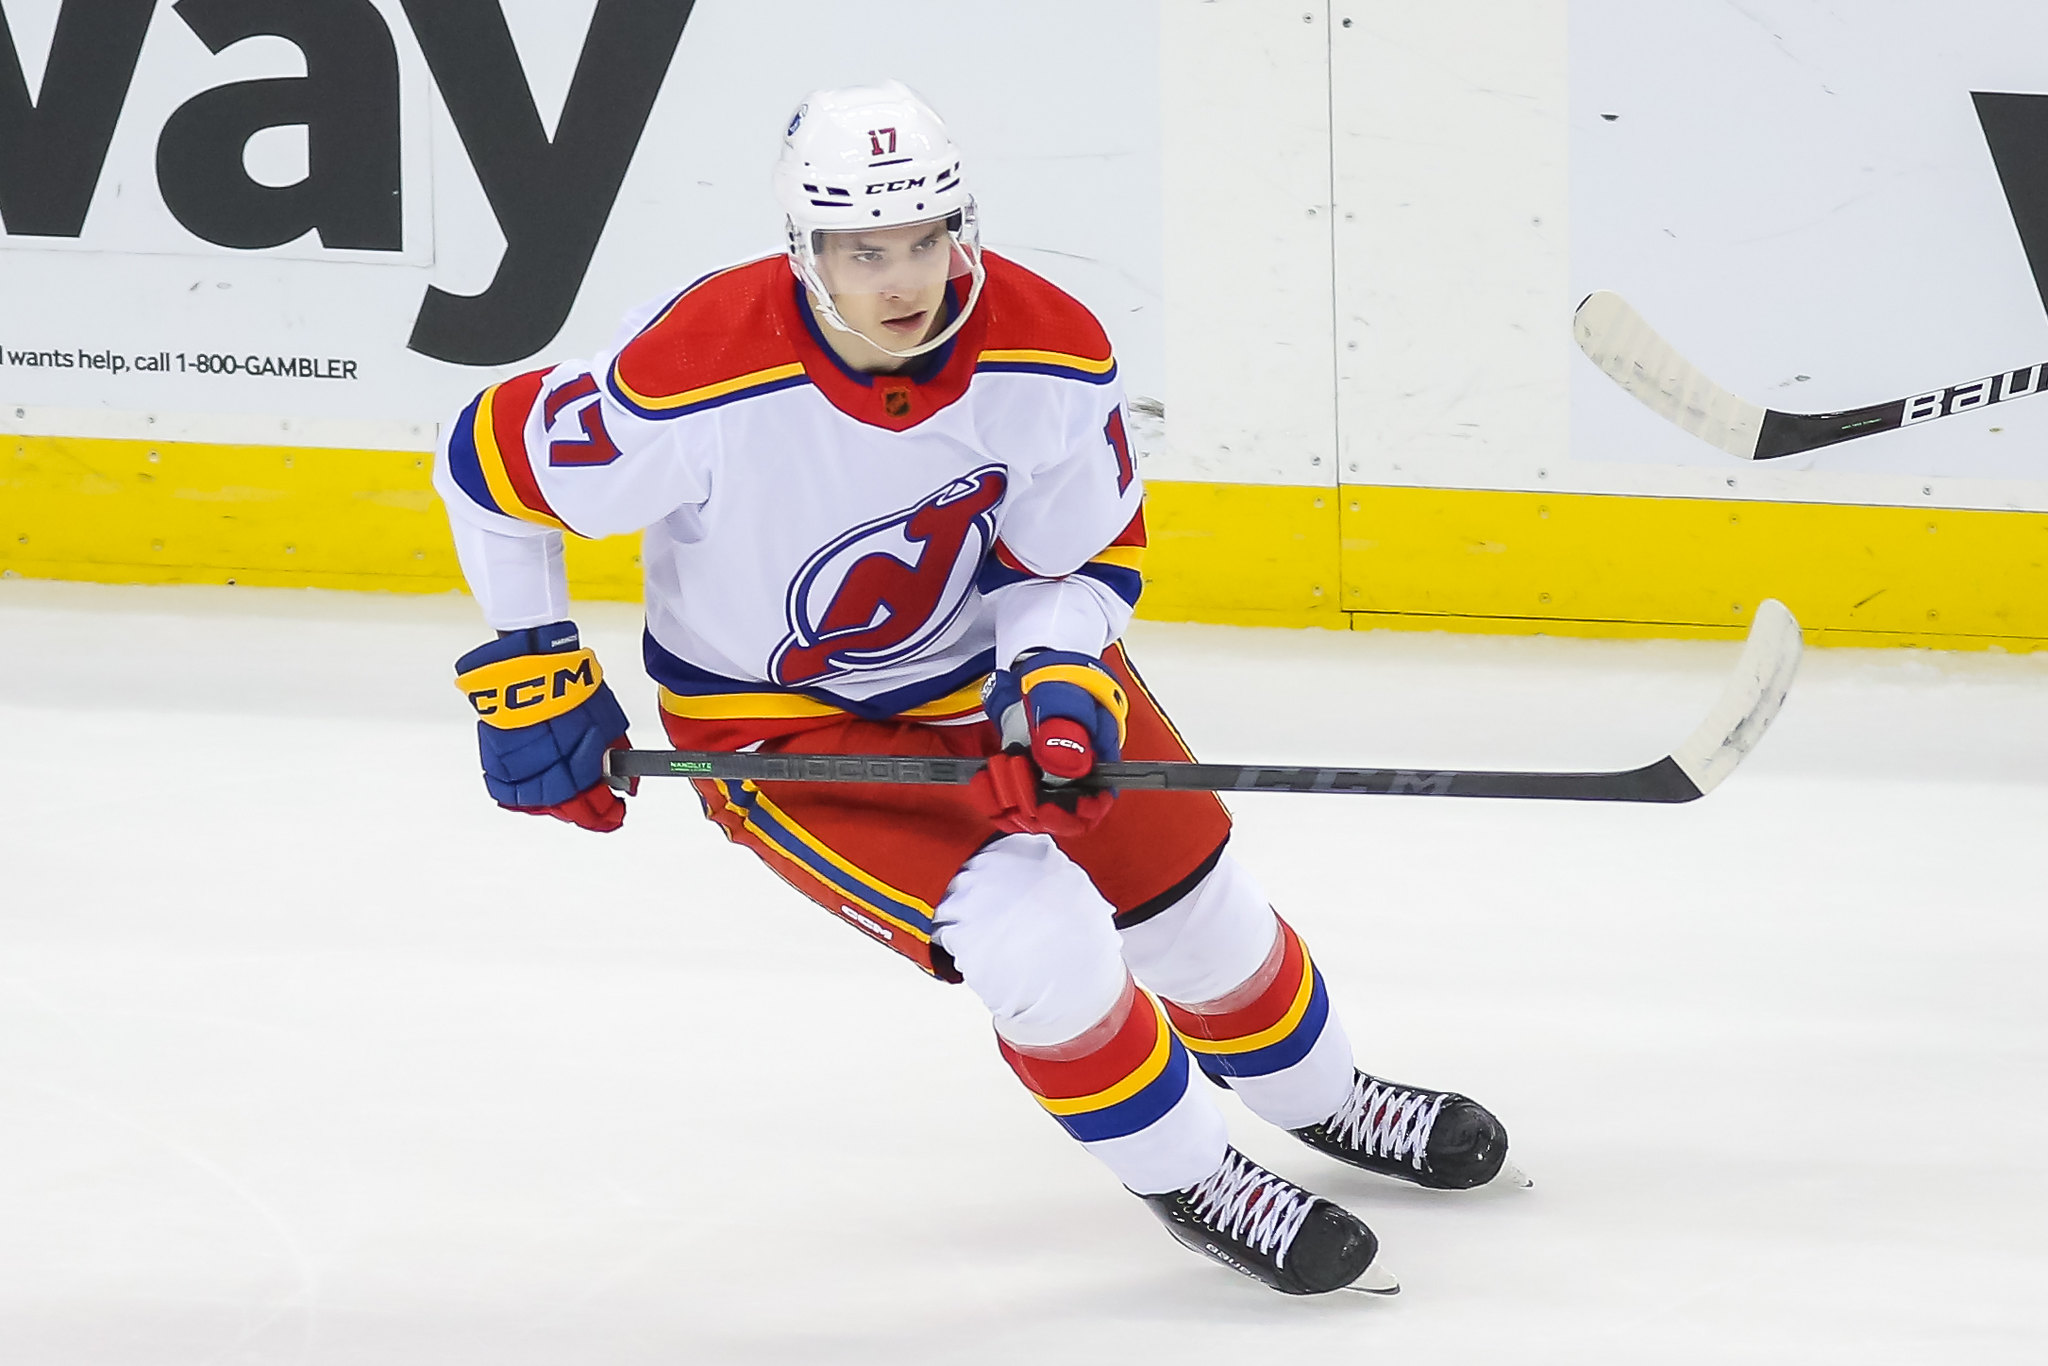 Devil of a deal: Flames lose 4-2 in New Jersey